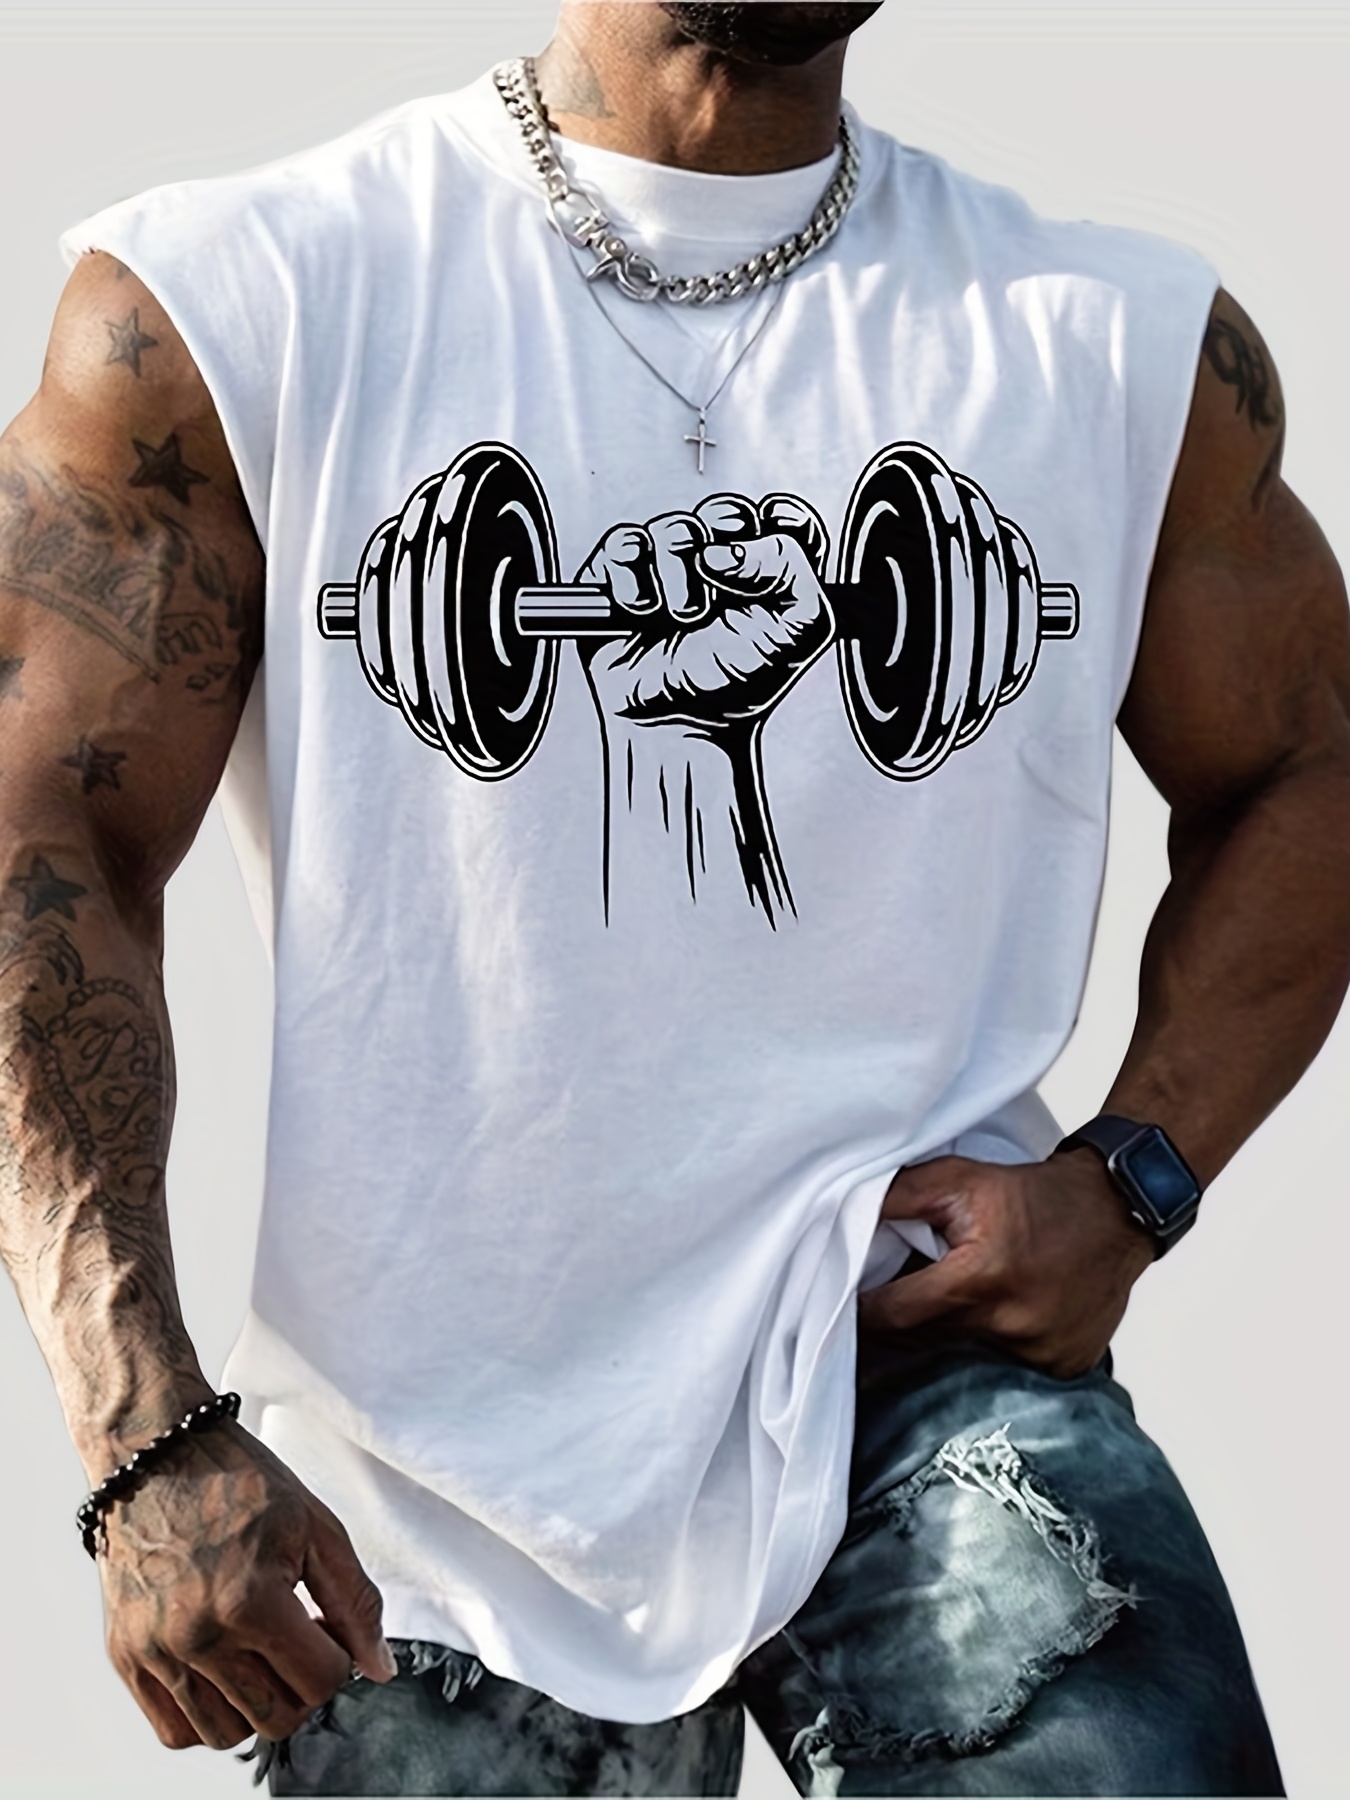 dumbbell print, men's graphic design tank top, casual comfy vest sleeveless shirts for summer, men's clothing top mixed color 0